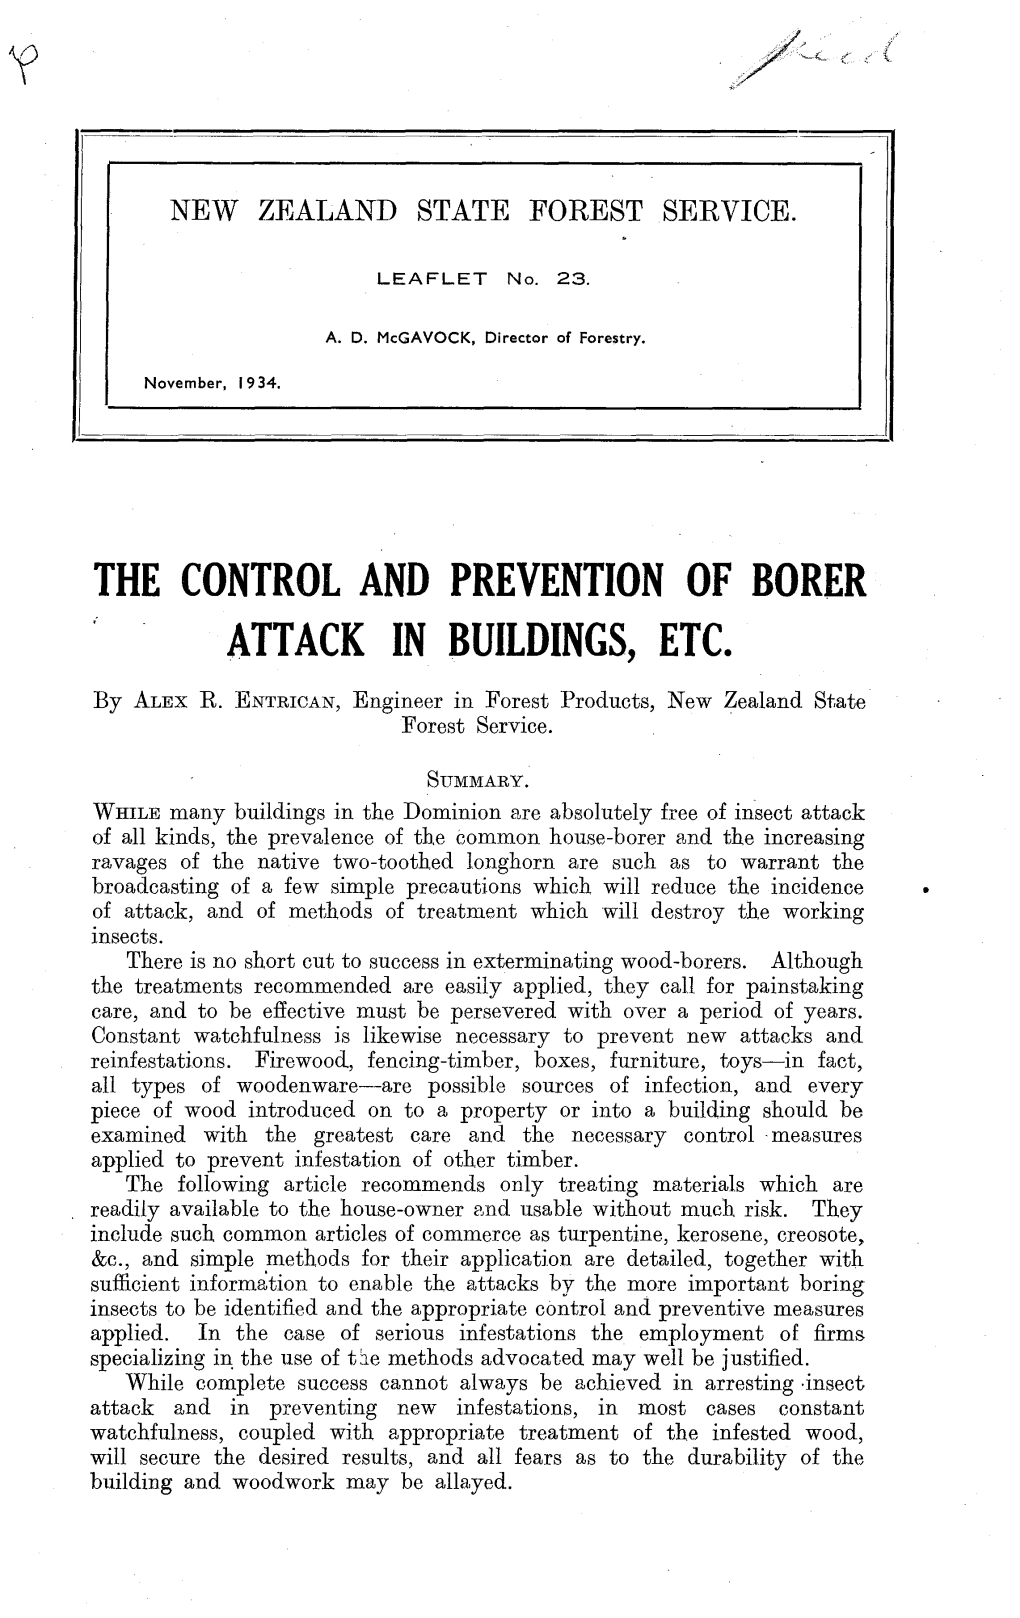 The Control and Prevention of Borer Attack in Buildings, Etc